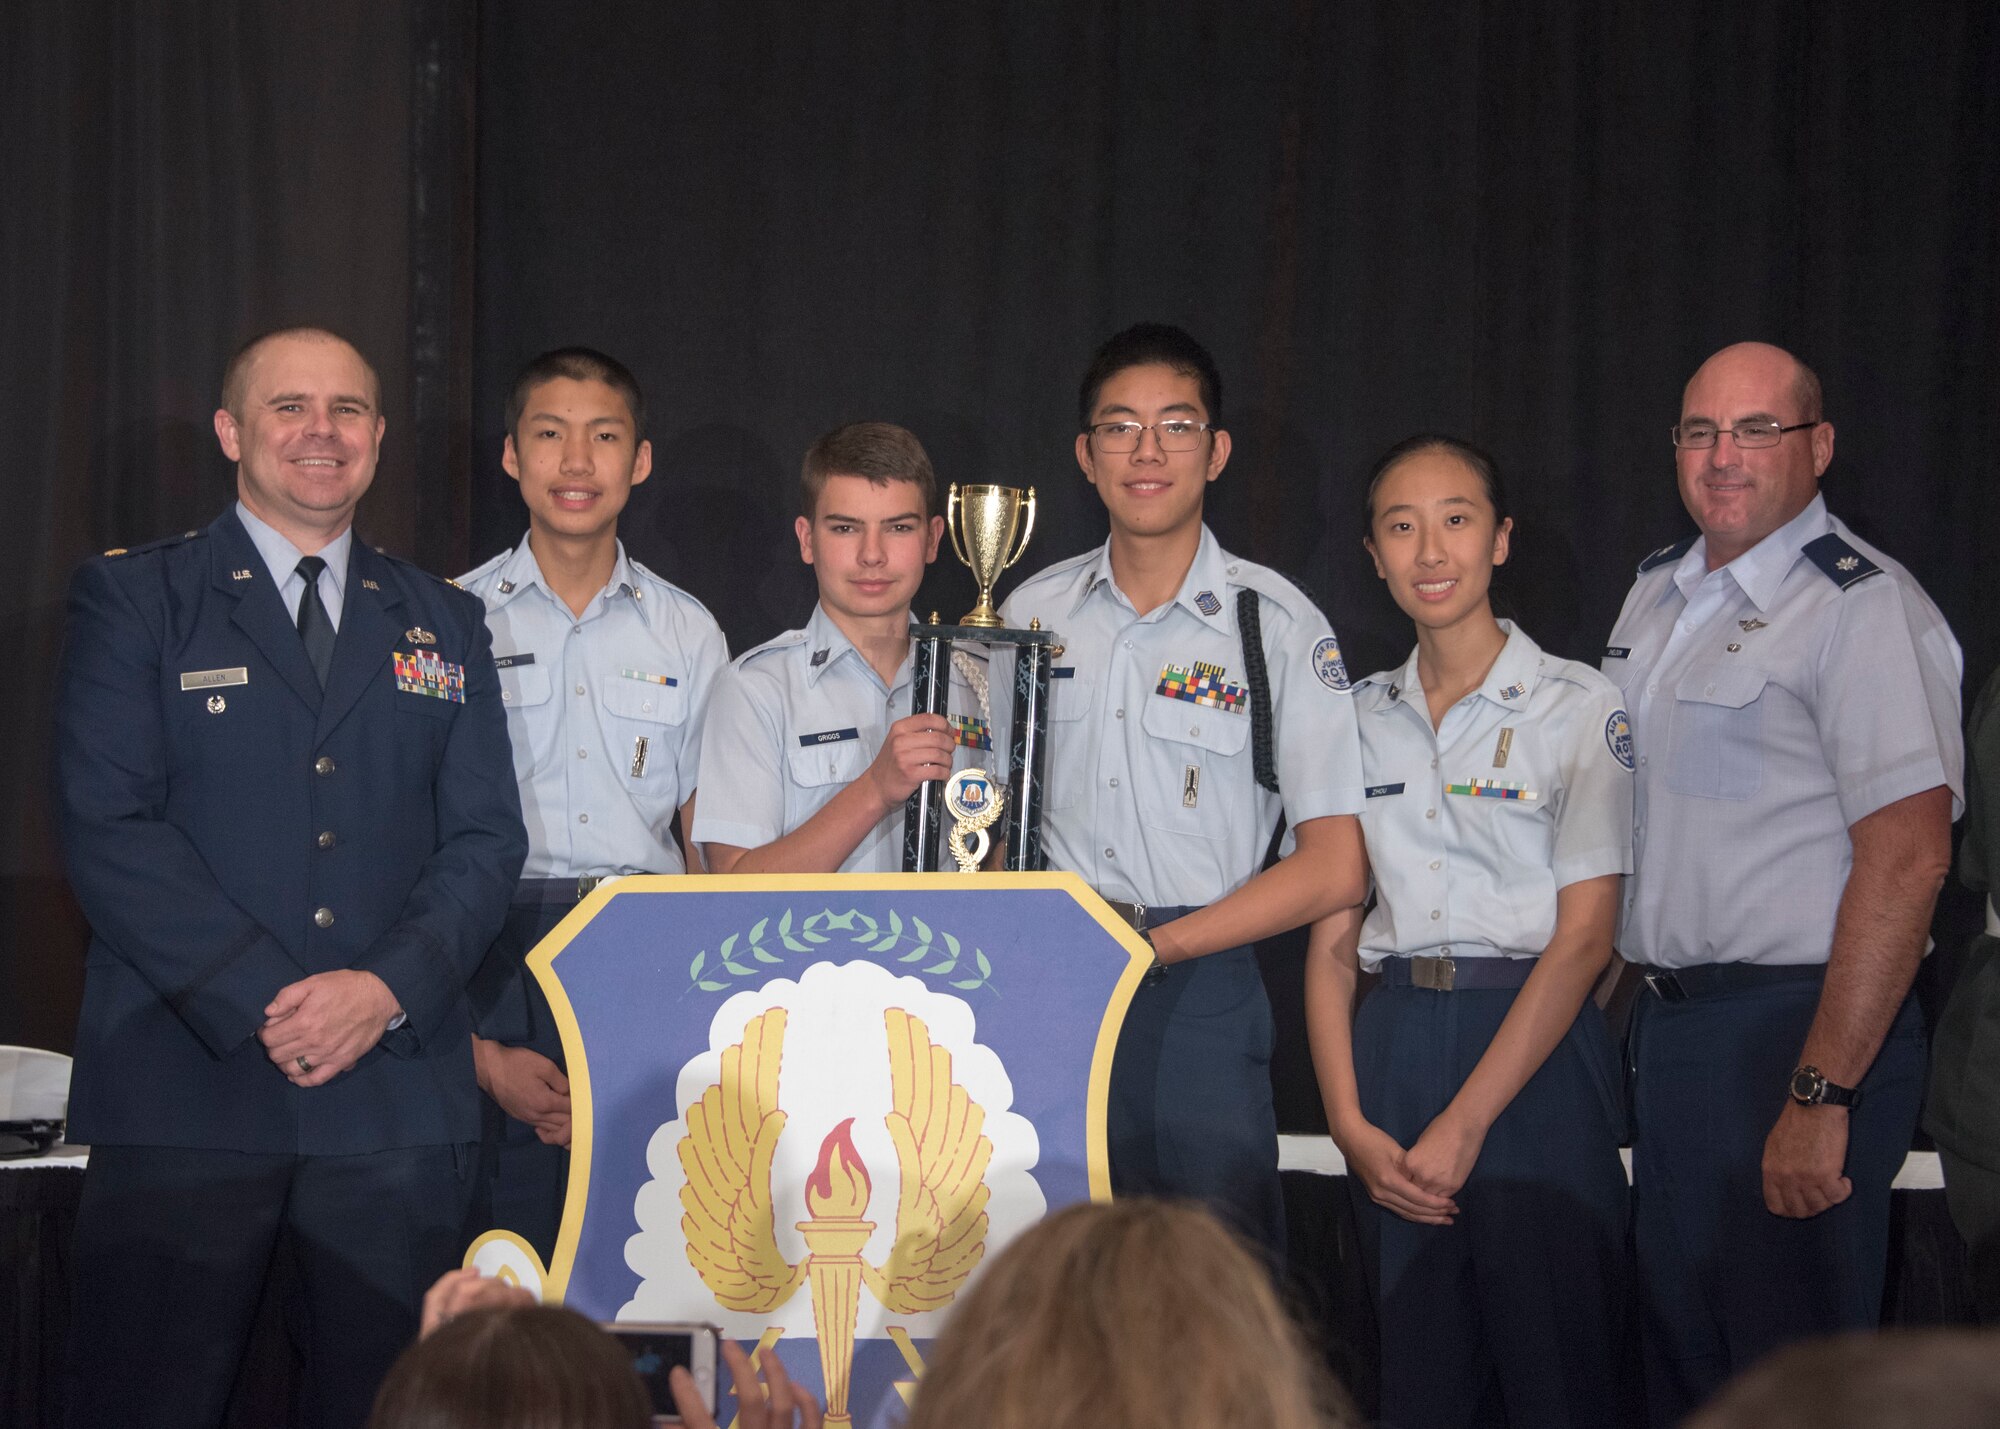 Cadets Samuel Chen, Kevin Griggs, Raymond Sun and Vanessa Zhou from Scripps Ranch High School, San Diego, Calif., celebrate second place with Maj. Michael Allen (left), operations deputy of Air Force JROTC, and Lt. Col. Michael Sheldon (right), JROTC instructor at Scripps Ranch High School during the 8th Annual JROTC Leadership and Academic Bowl award ceremony, in Washington, D.C., June 24, 2019.The Junior ROTC Academic Bowl is a multi-level competition that high school Junior ROTC units from each service participate in throughout the school year. The competition includes a mix of Junior ROTC curriculum, English, Math and Science, all skills that contribute to the Air Force Junior ROTC core mission of developing citizens of character. (Air Force Photo by Staff Sgt. Jared Duhon)